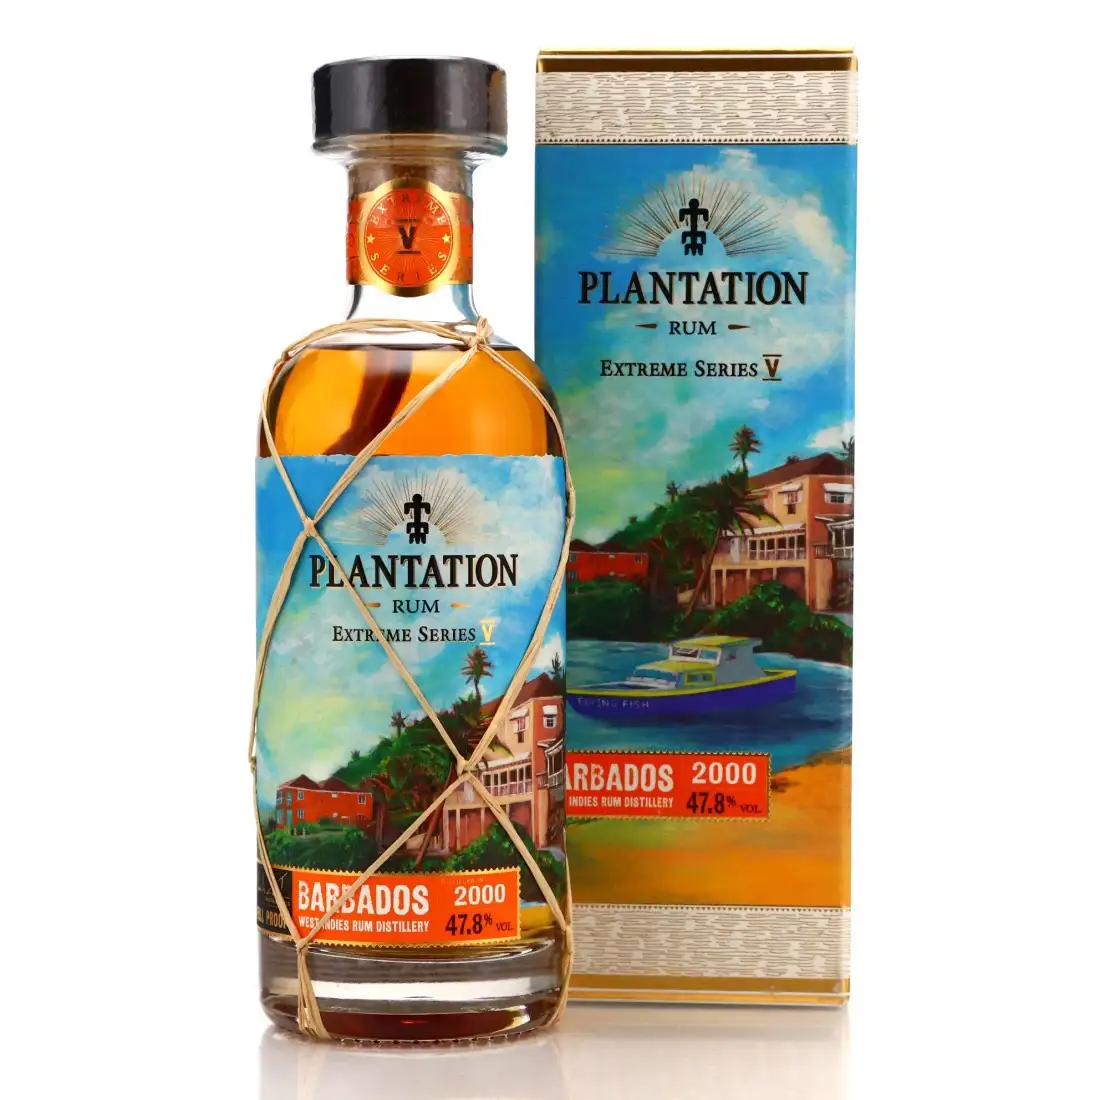 Image of the front of the bottle of the rum Plantation Extreme No. 5